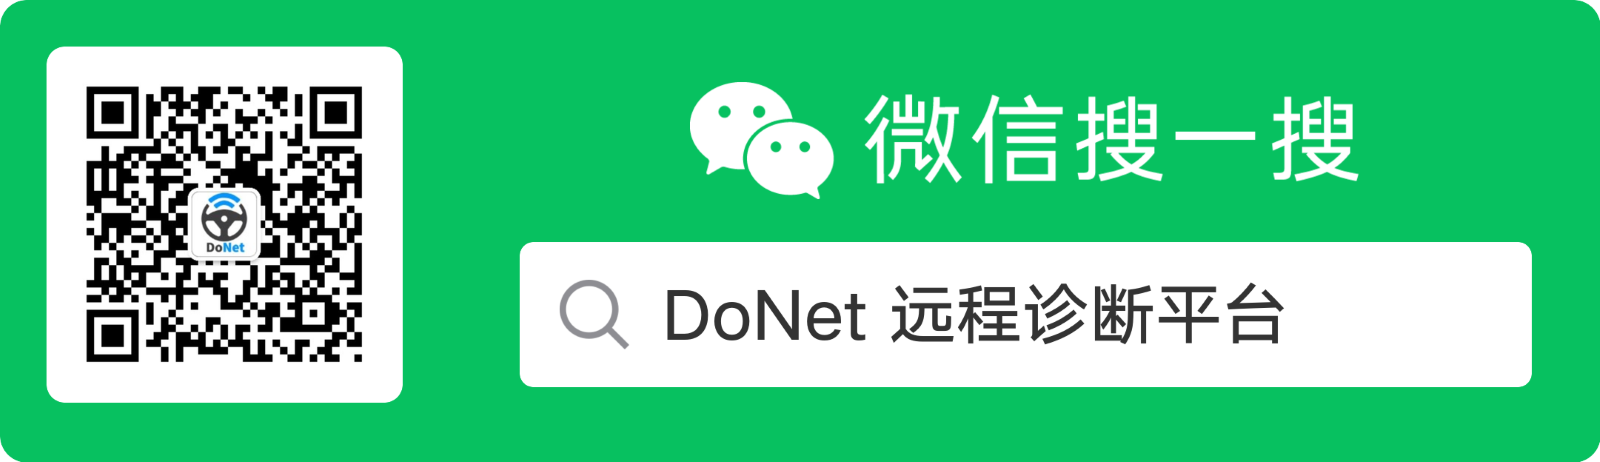 donet-wechat-qrcode-green.png